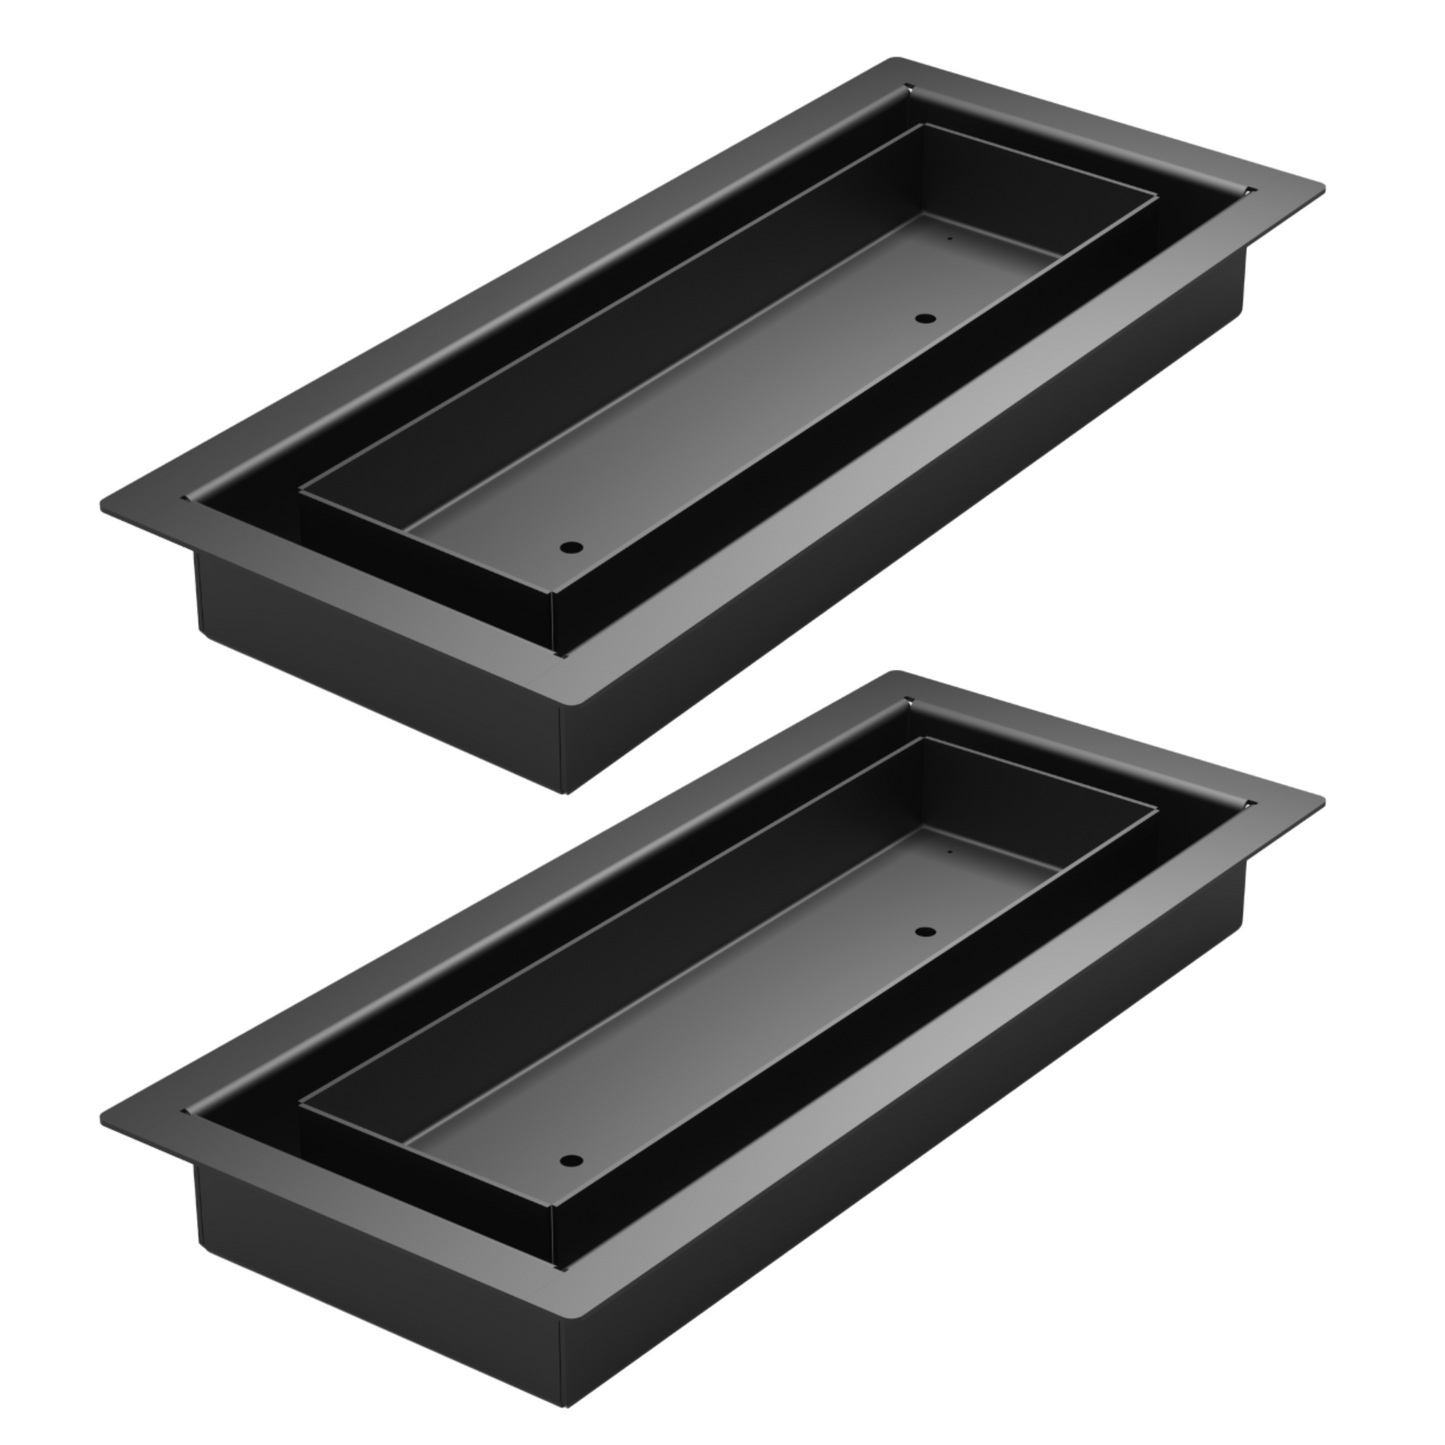 4"X10" Drop-in Air Vent, Flush Floor-Matching, All Metal, Floor Vent Cover